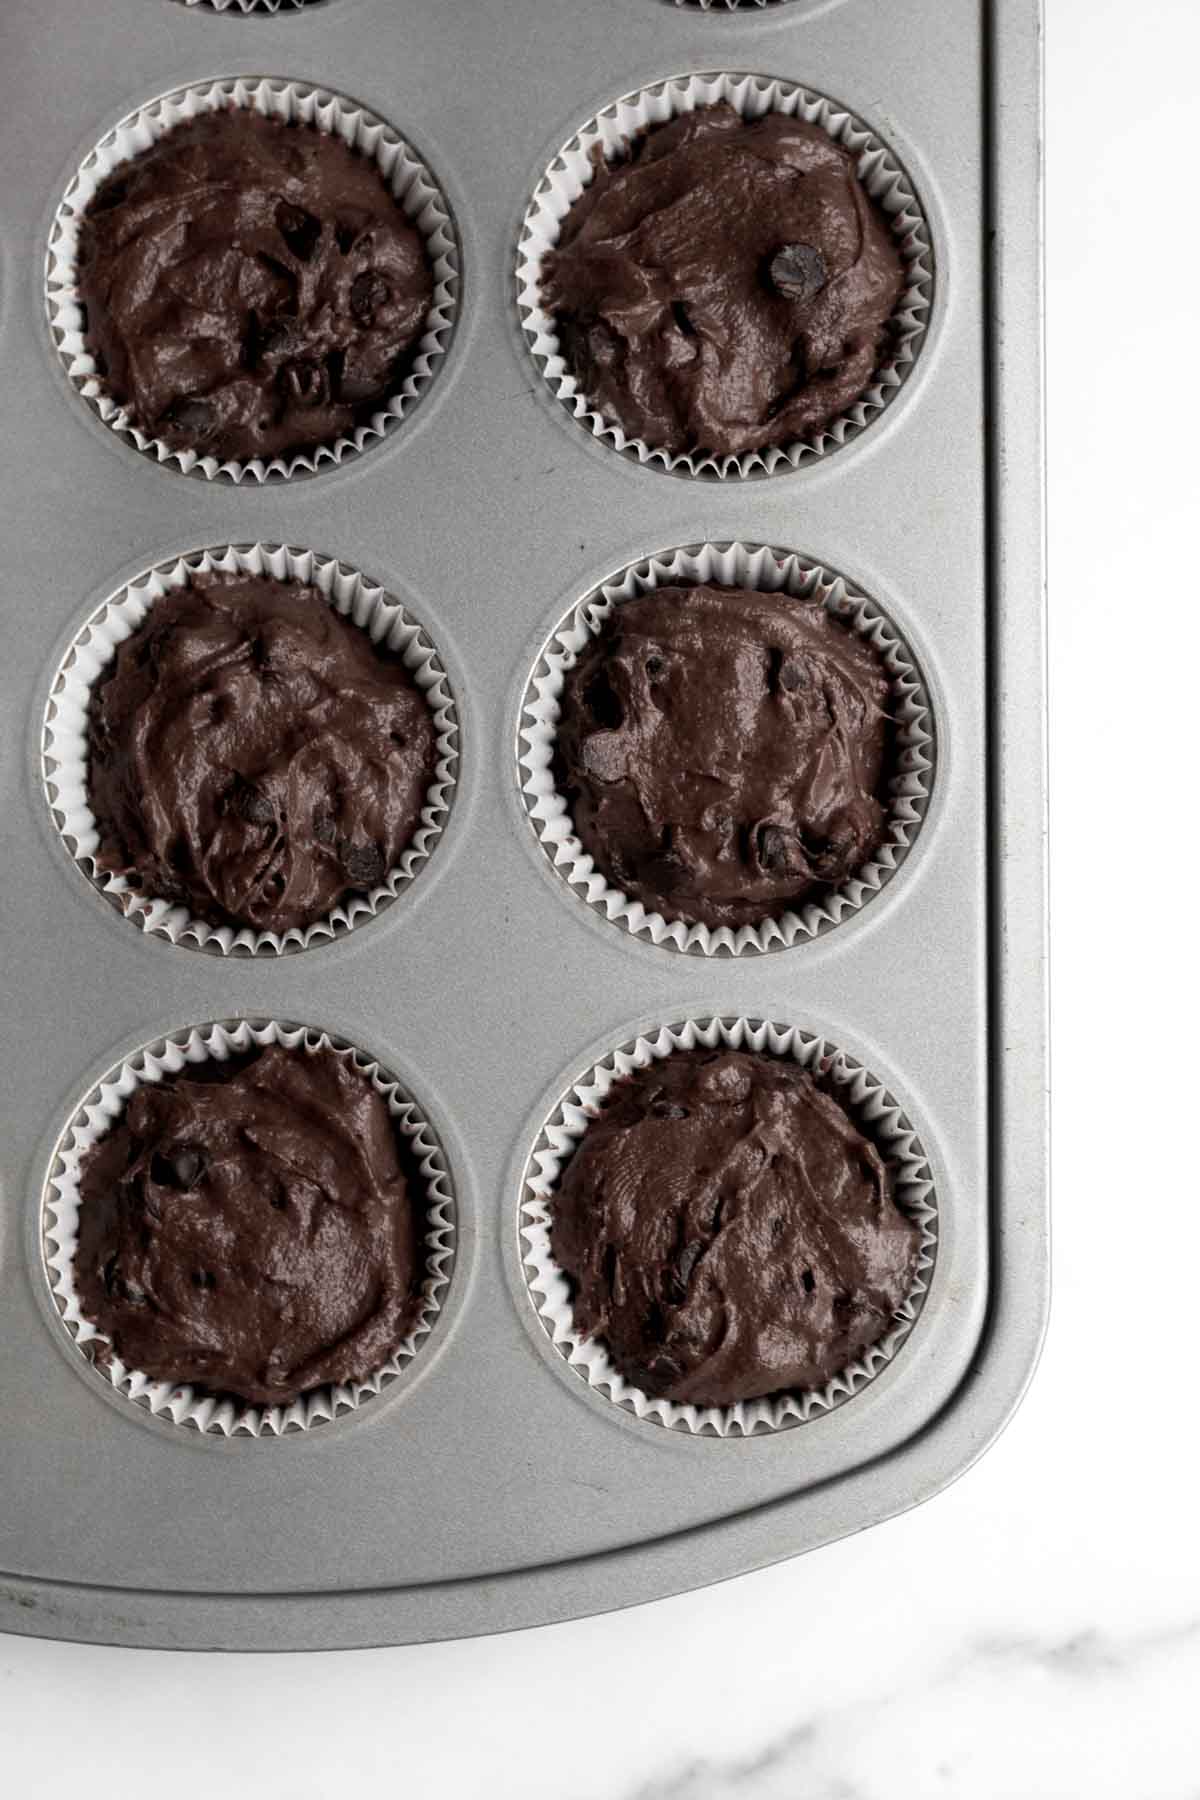 A muffin pan with the batter in muffin wrappers.